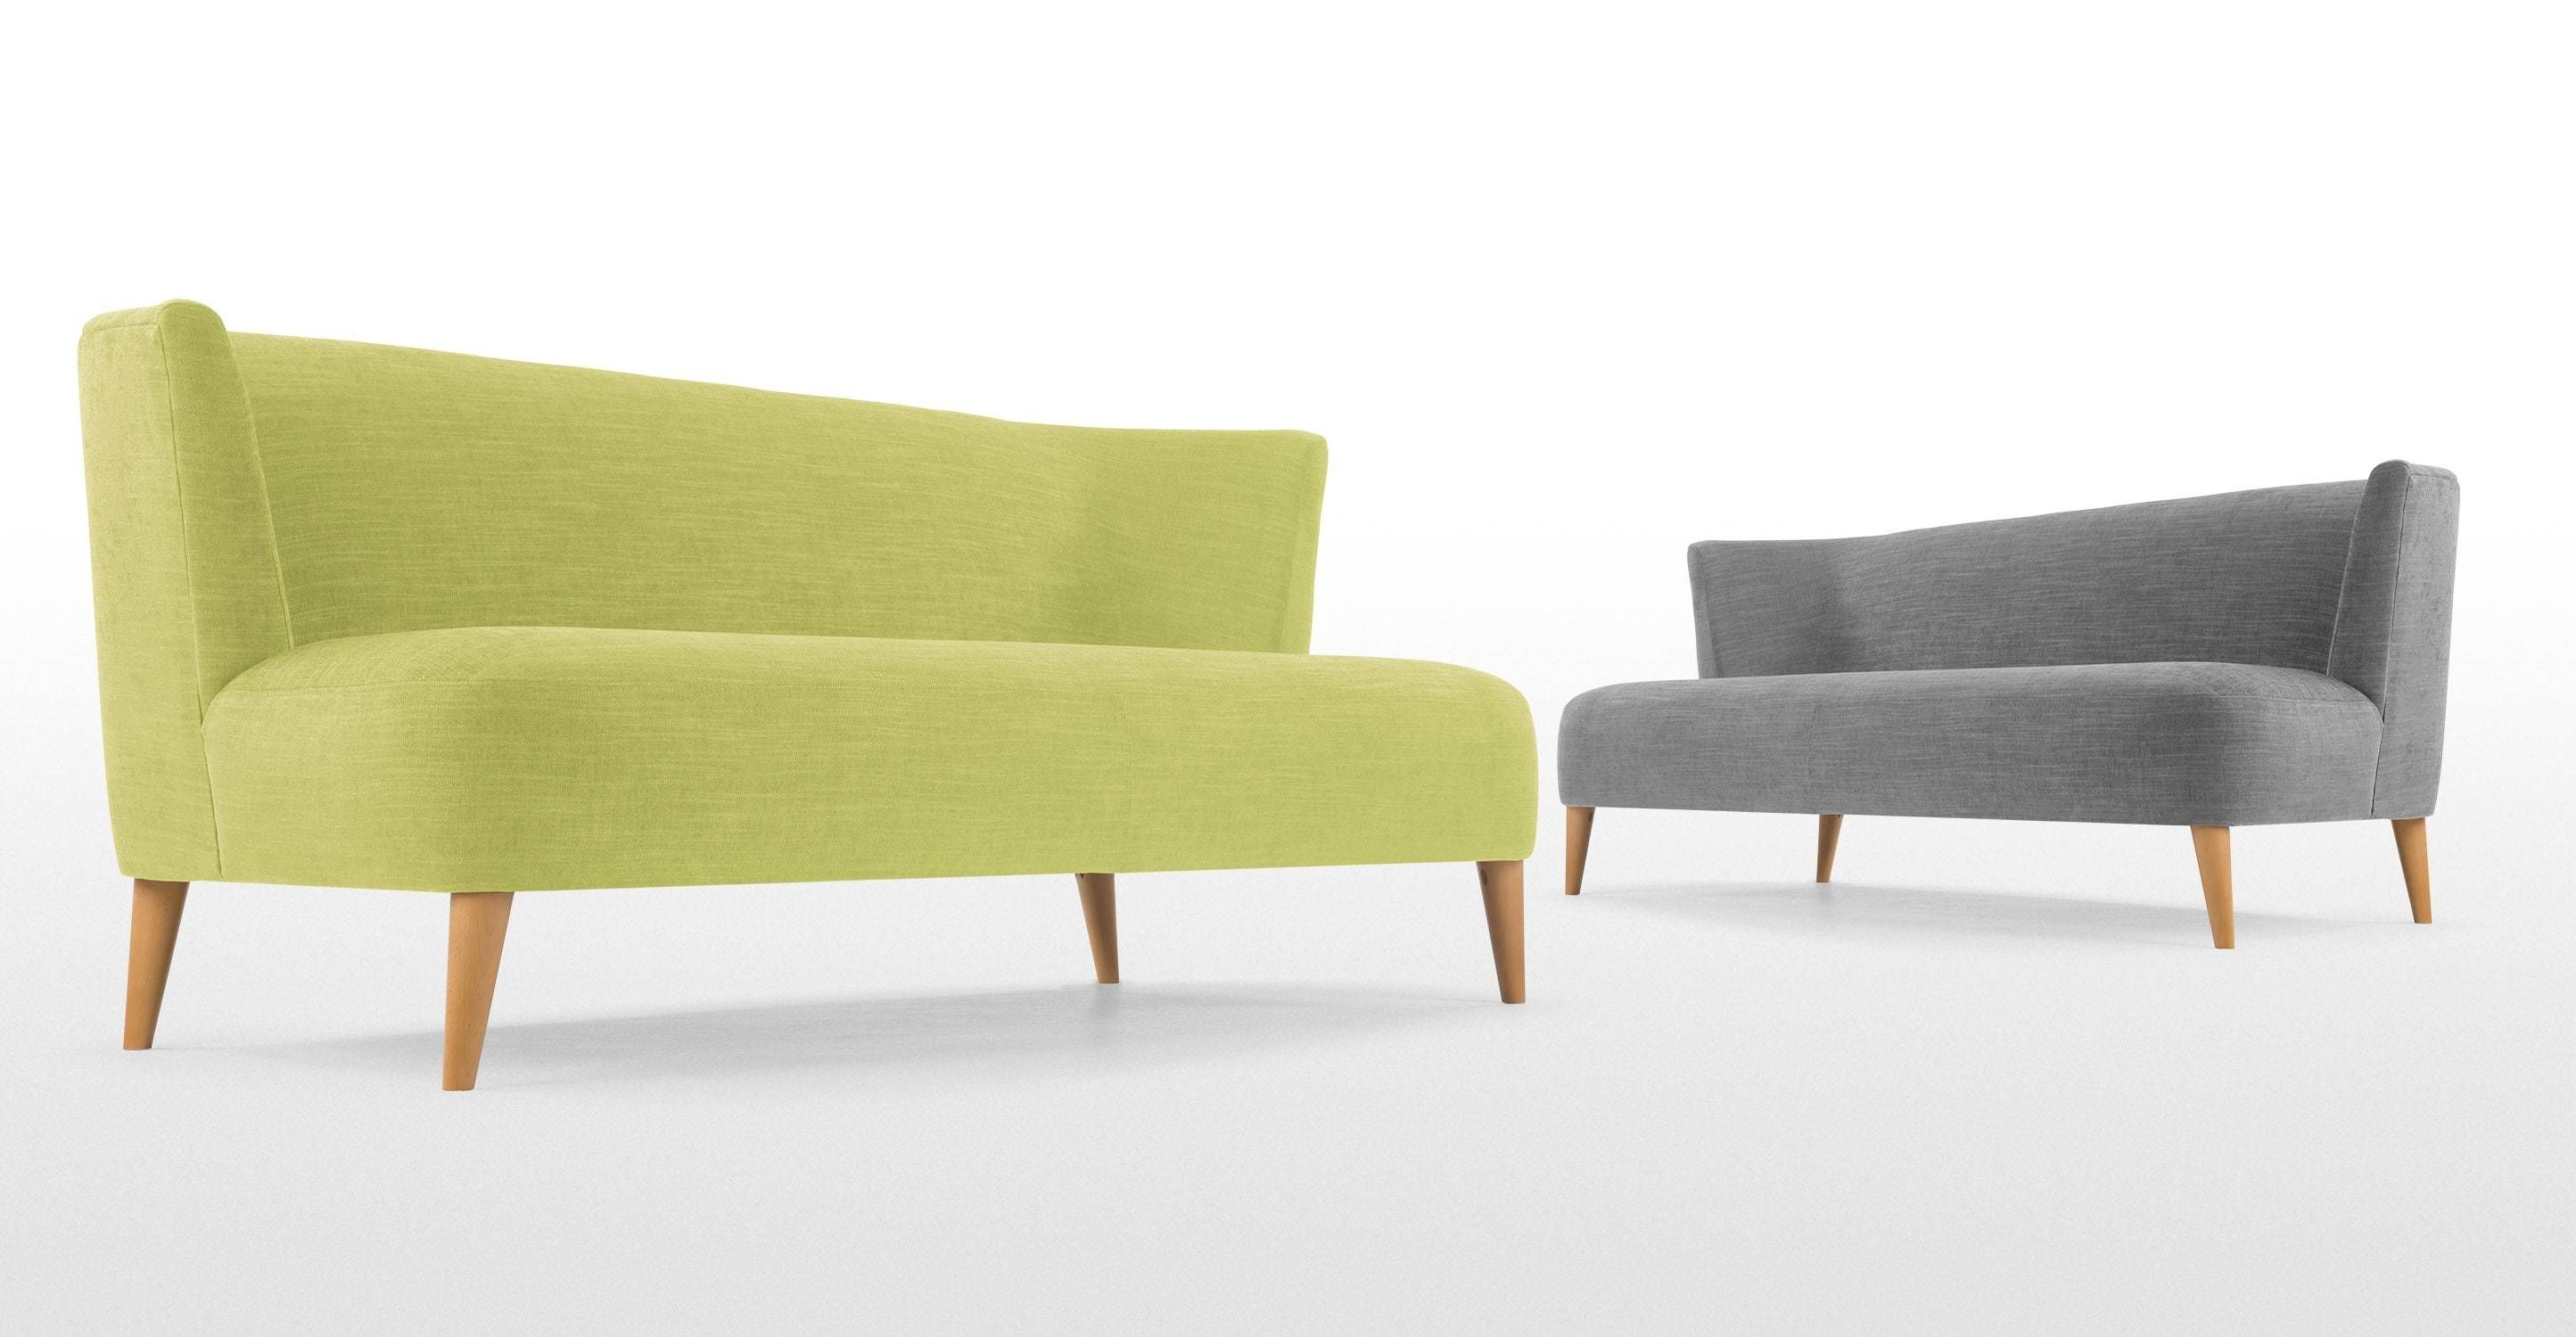 Chartreuse Sofa 28 With Chartreuse Sofa | Jinanhongyu Within Chartreuse Sofas (View 3 of 15)